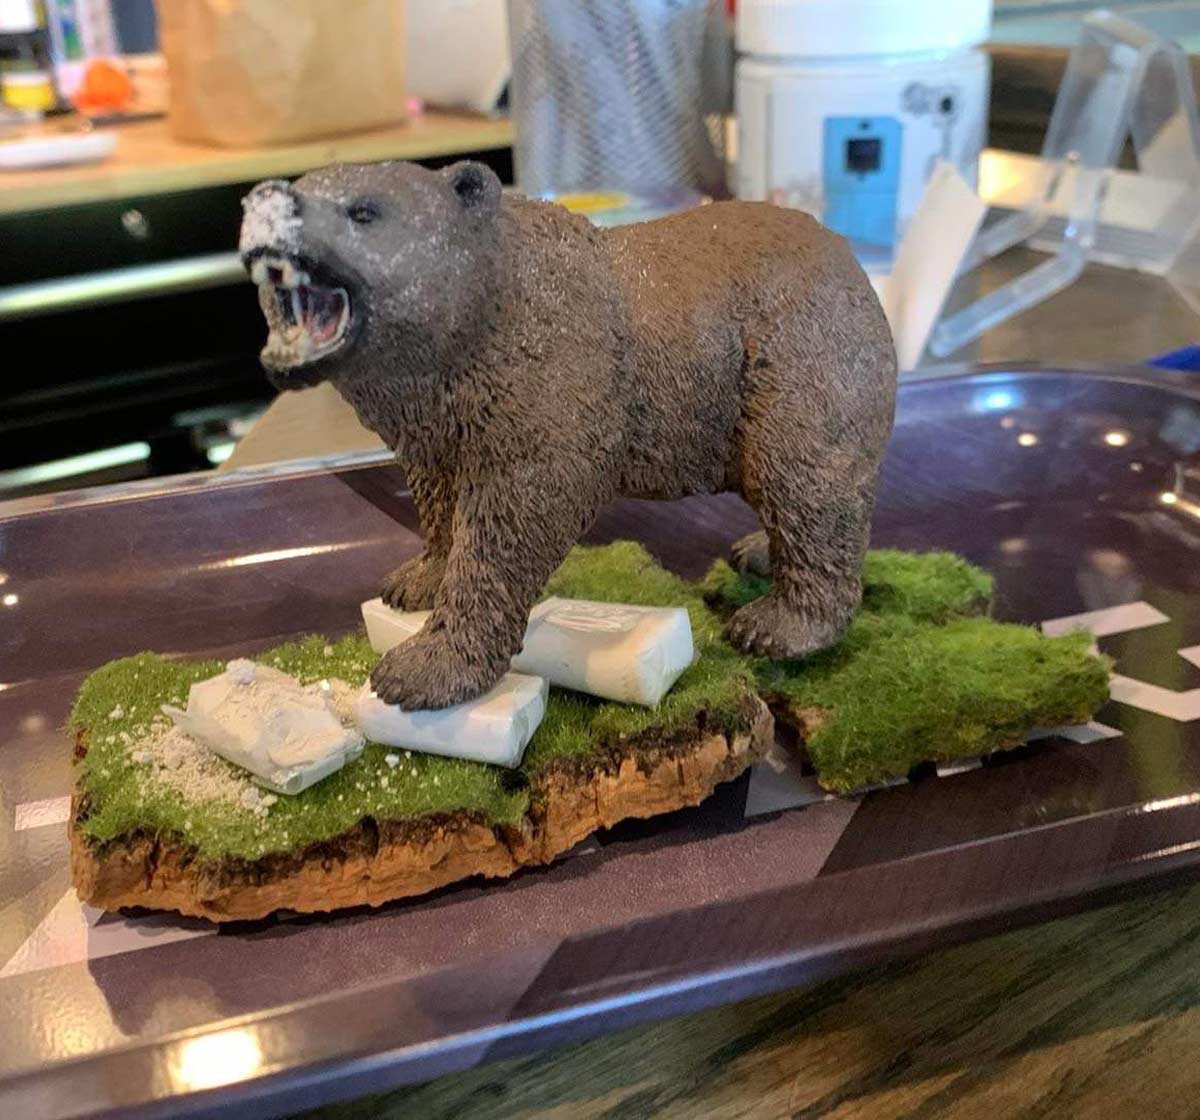 I made a cocaine bear diorama at work today (I work in a weed shop)